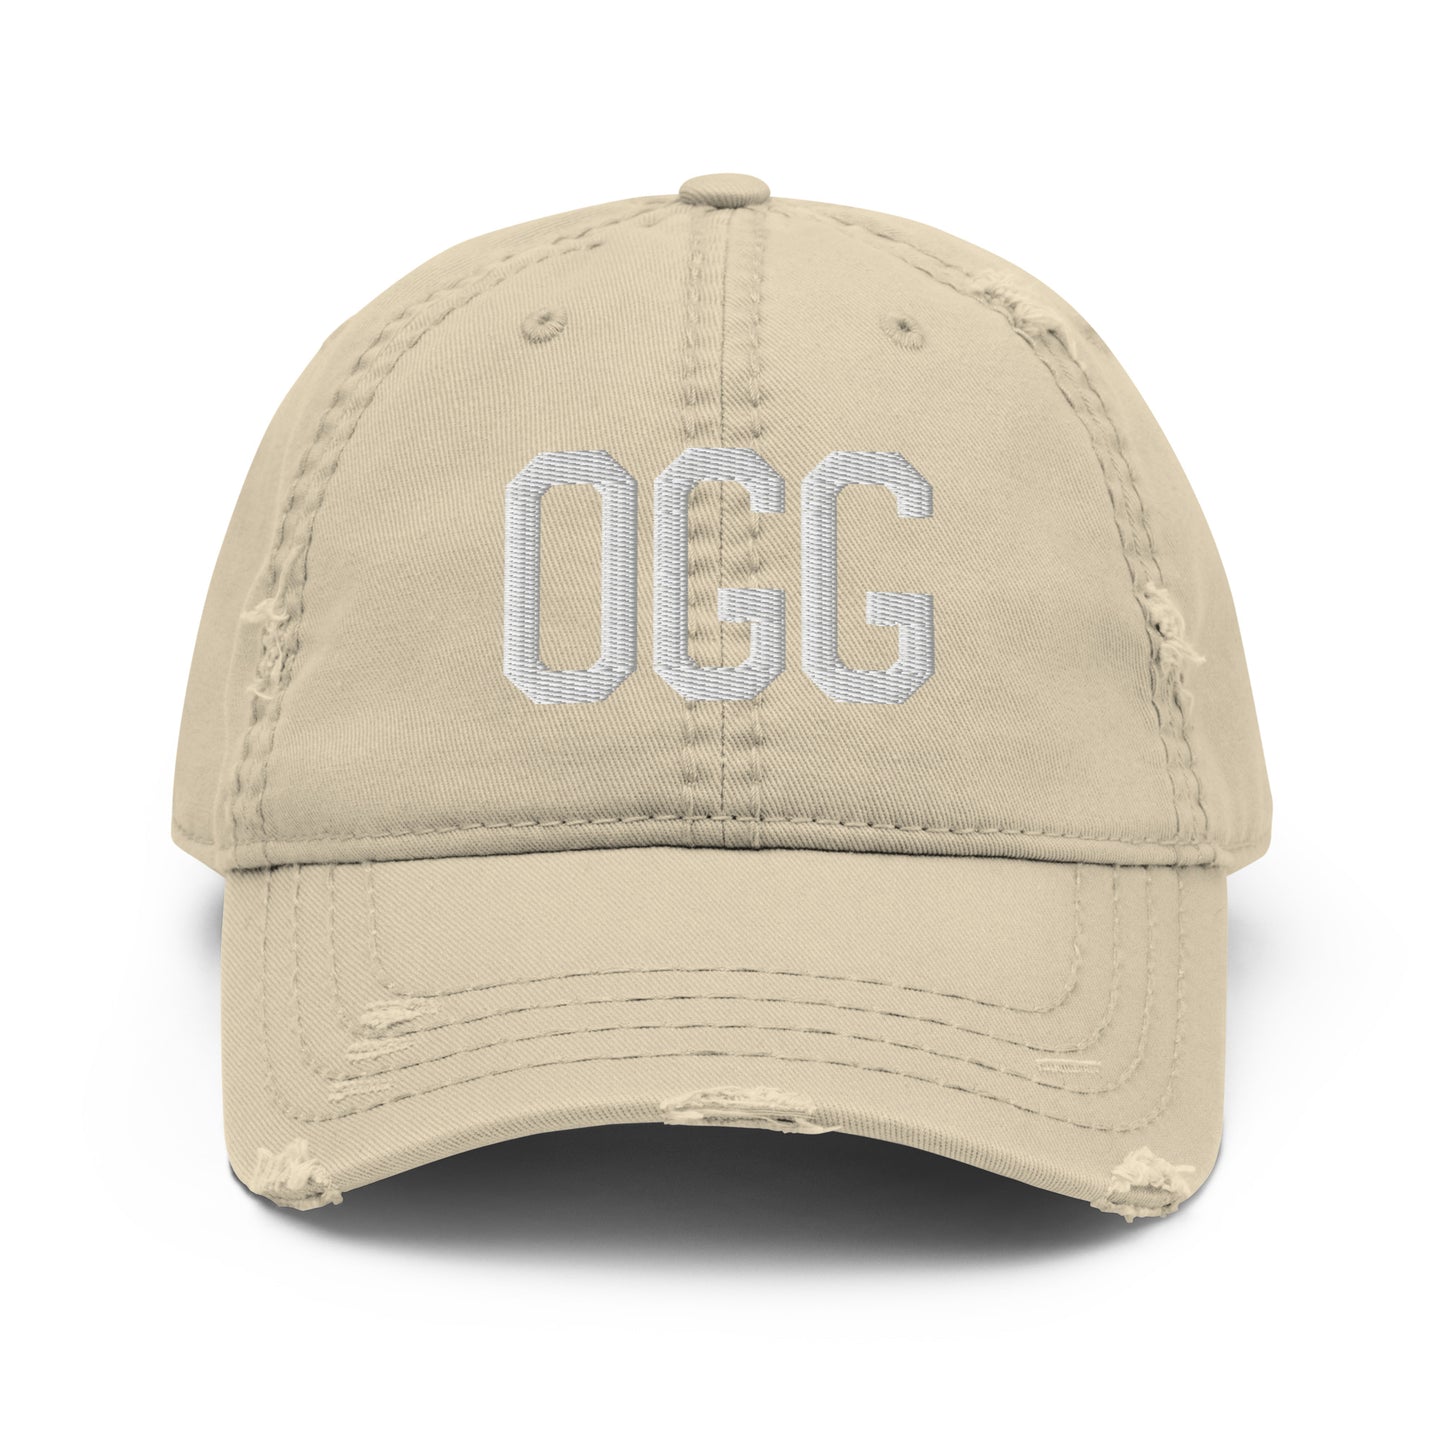 Airport Code Distressed Hat - White • OGG Maui • YHM Designs - Image 18